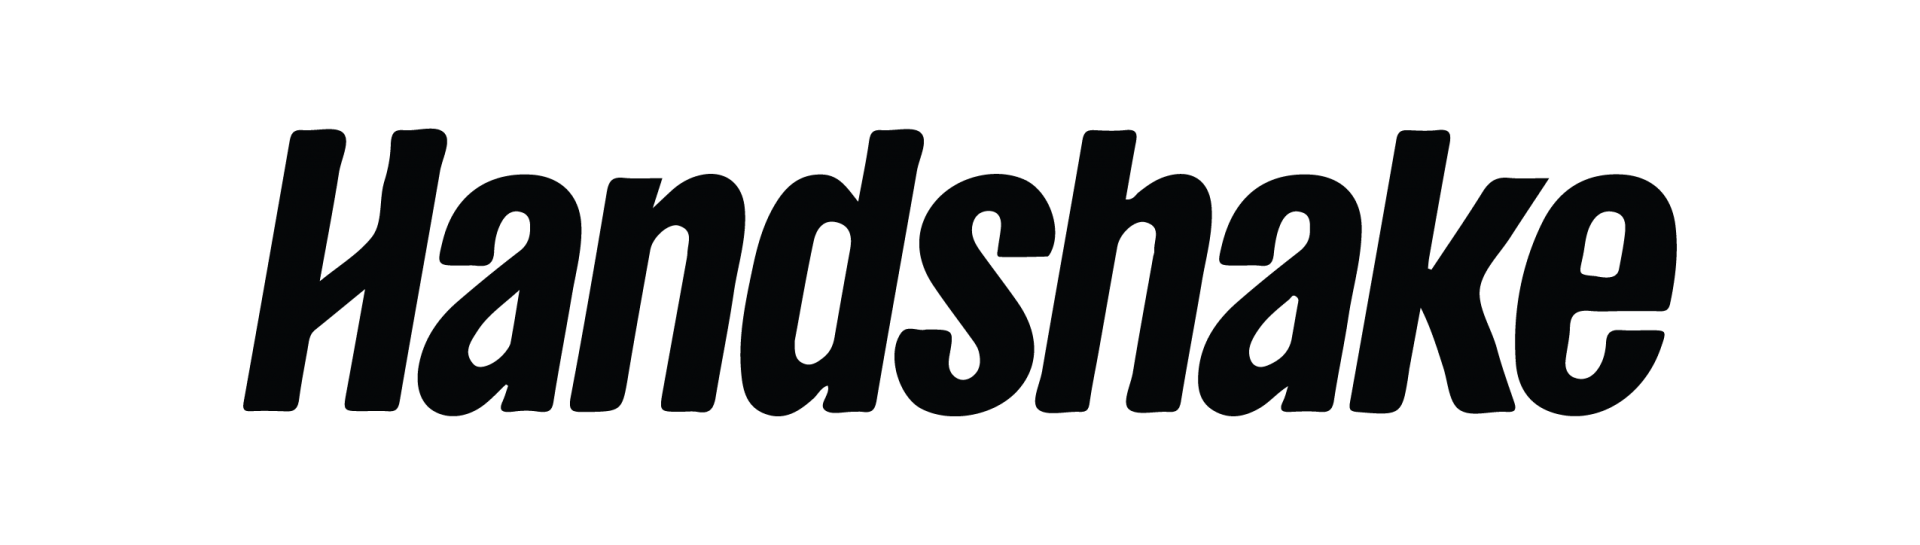 Picture of the Handshake logo.